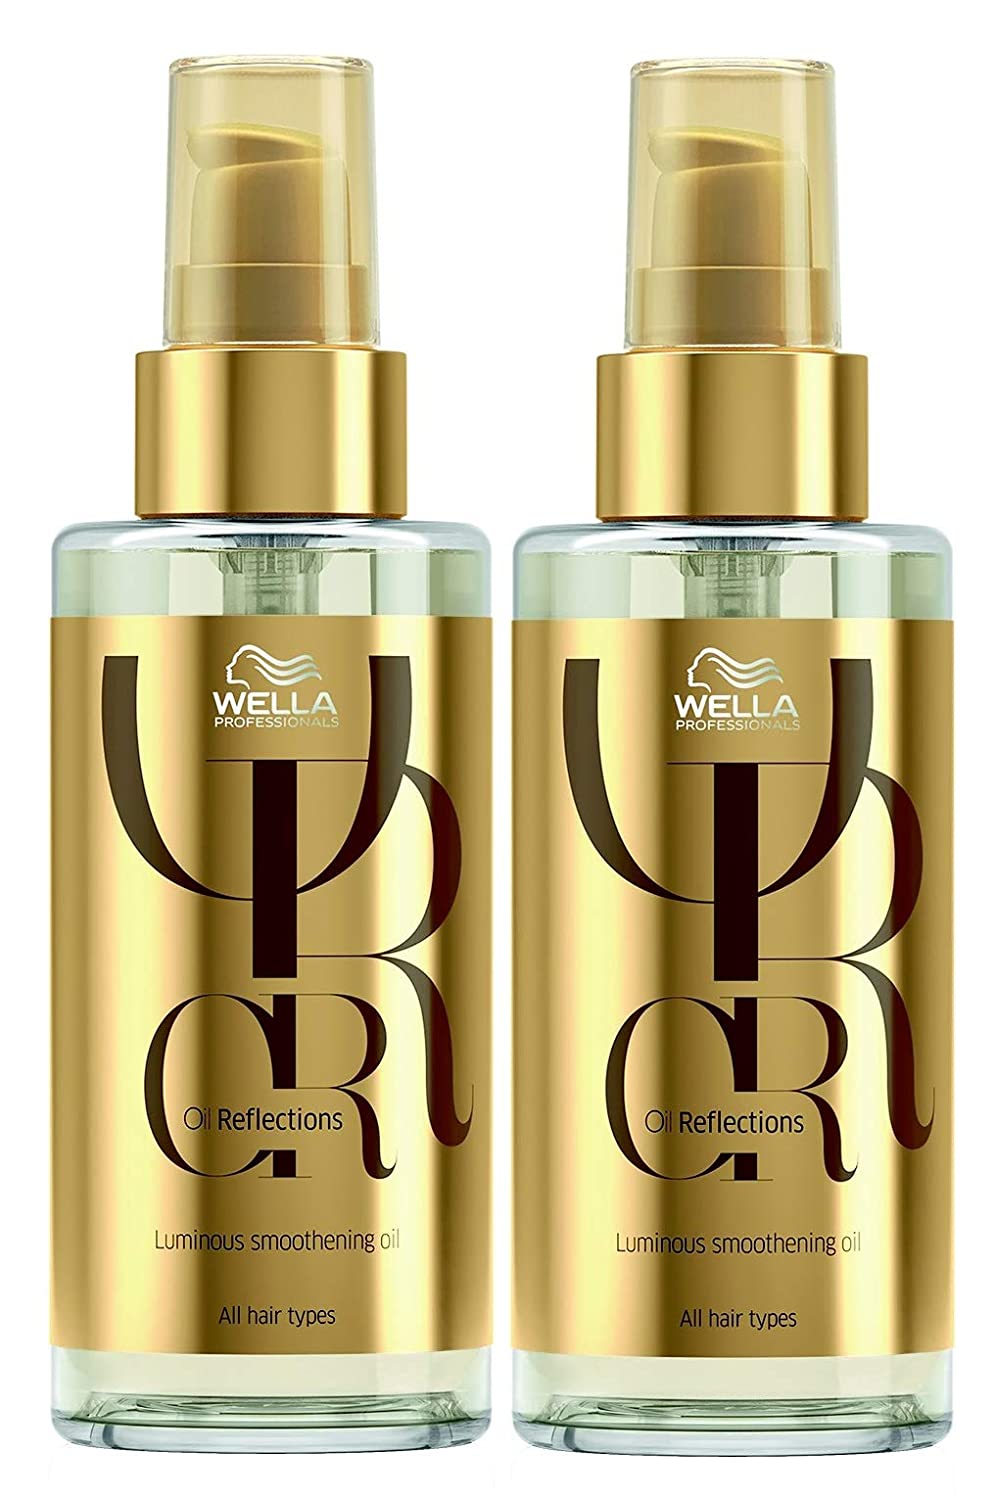 2 x Luminous Smoothening Oil Reflections Wella Professionals Oil for Smooth Hair 100 ml